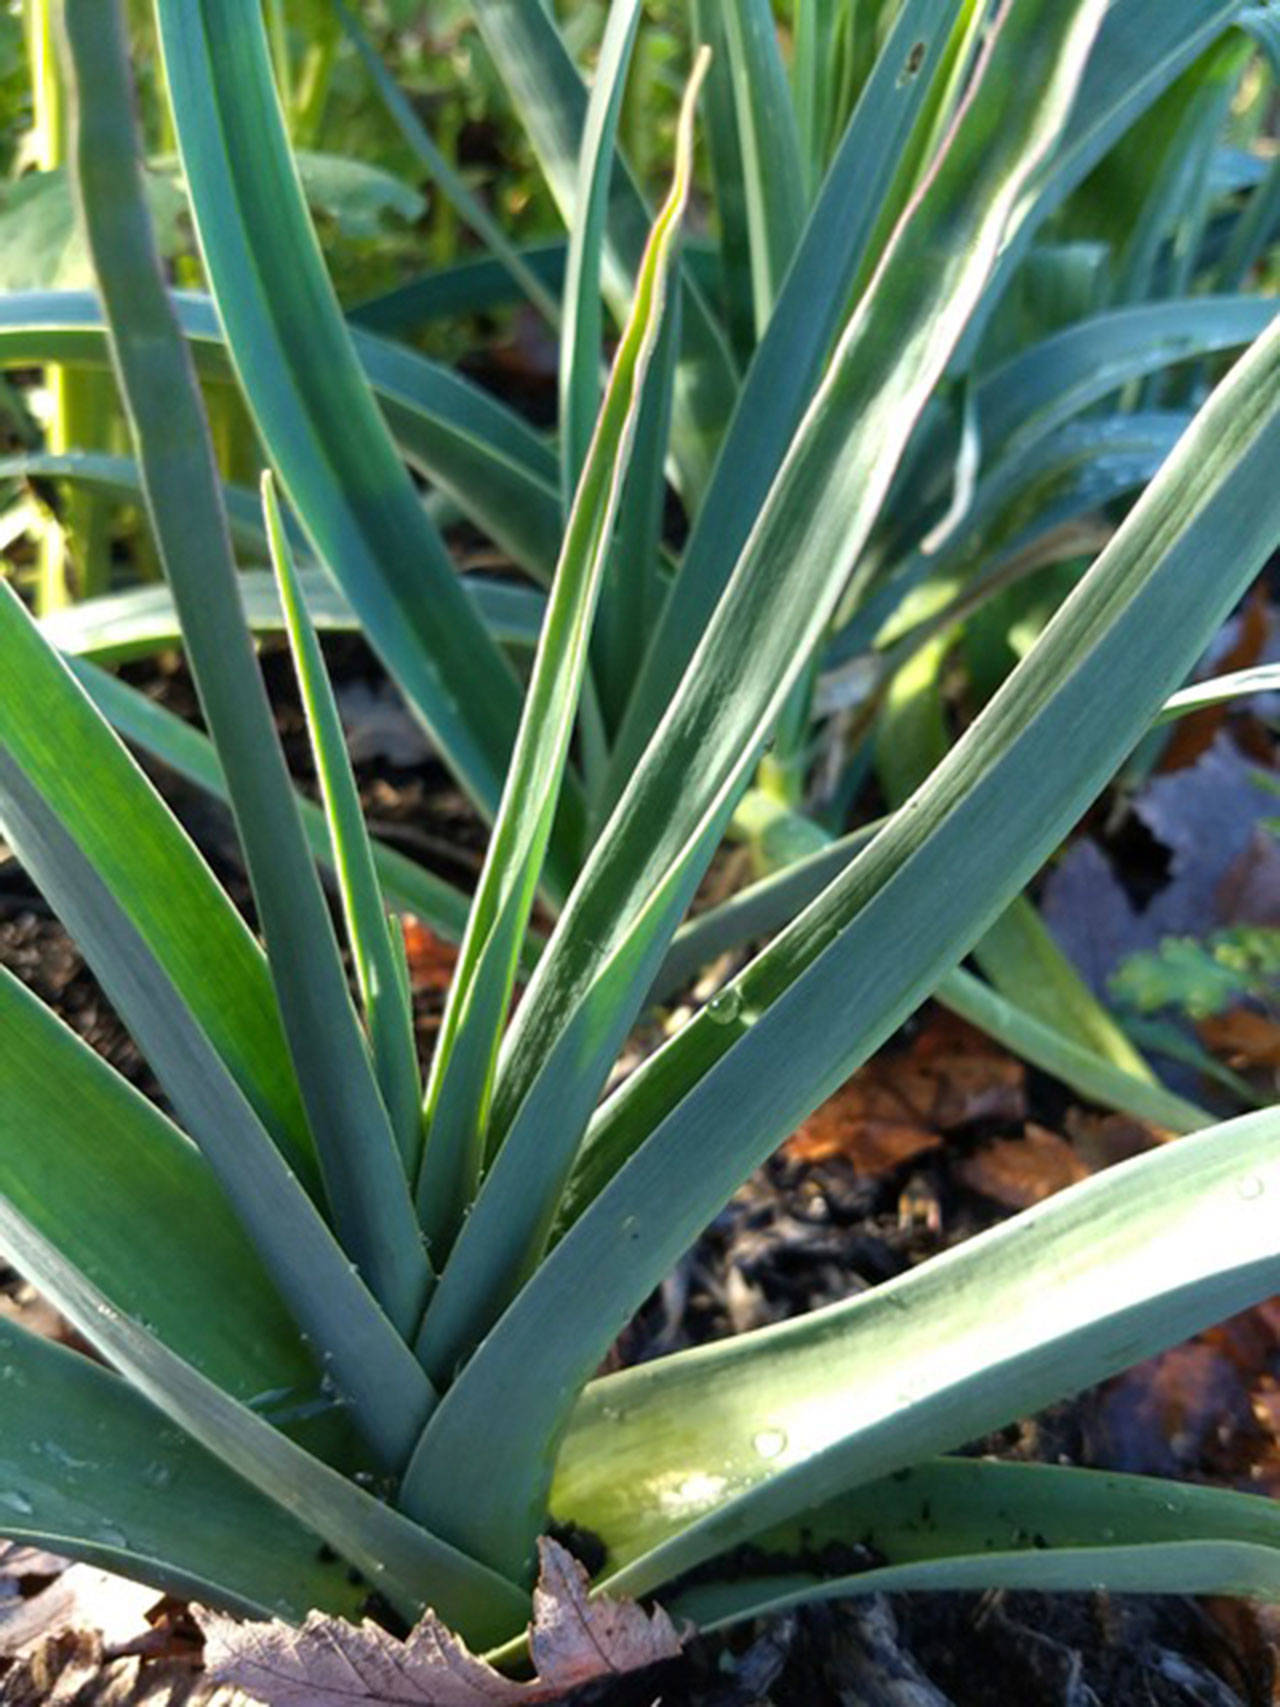 Leeks are ready for harvest in the winter in the Northwest. (Betsy Wharton/for Peninsula Daily News)